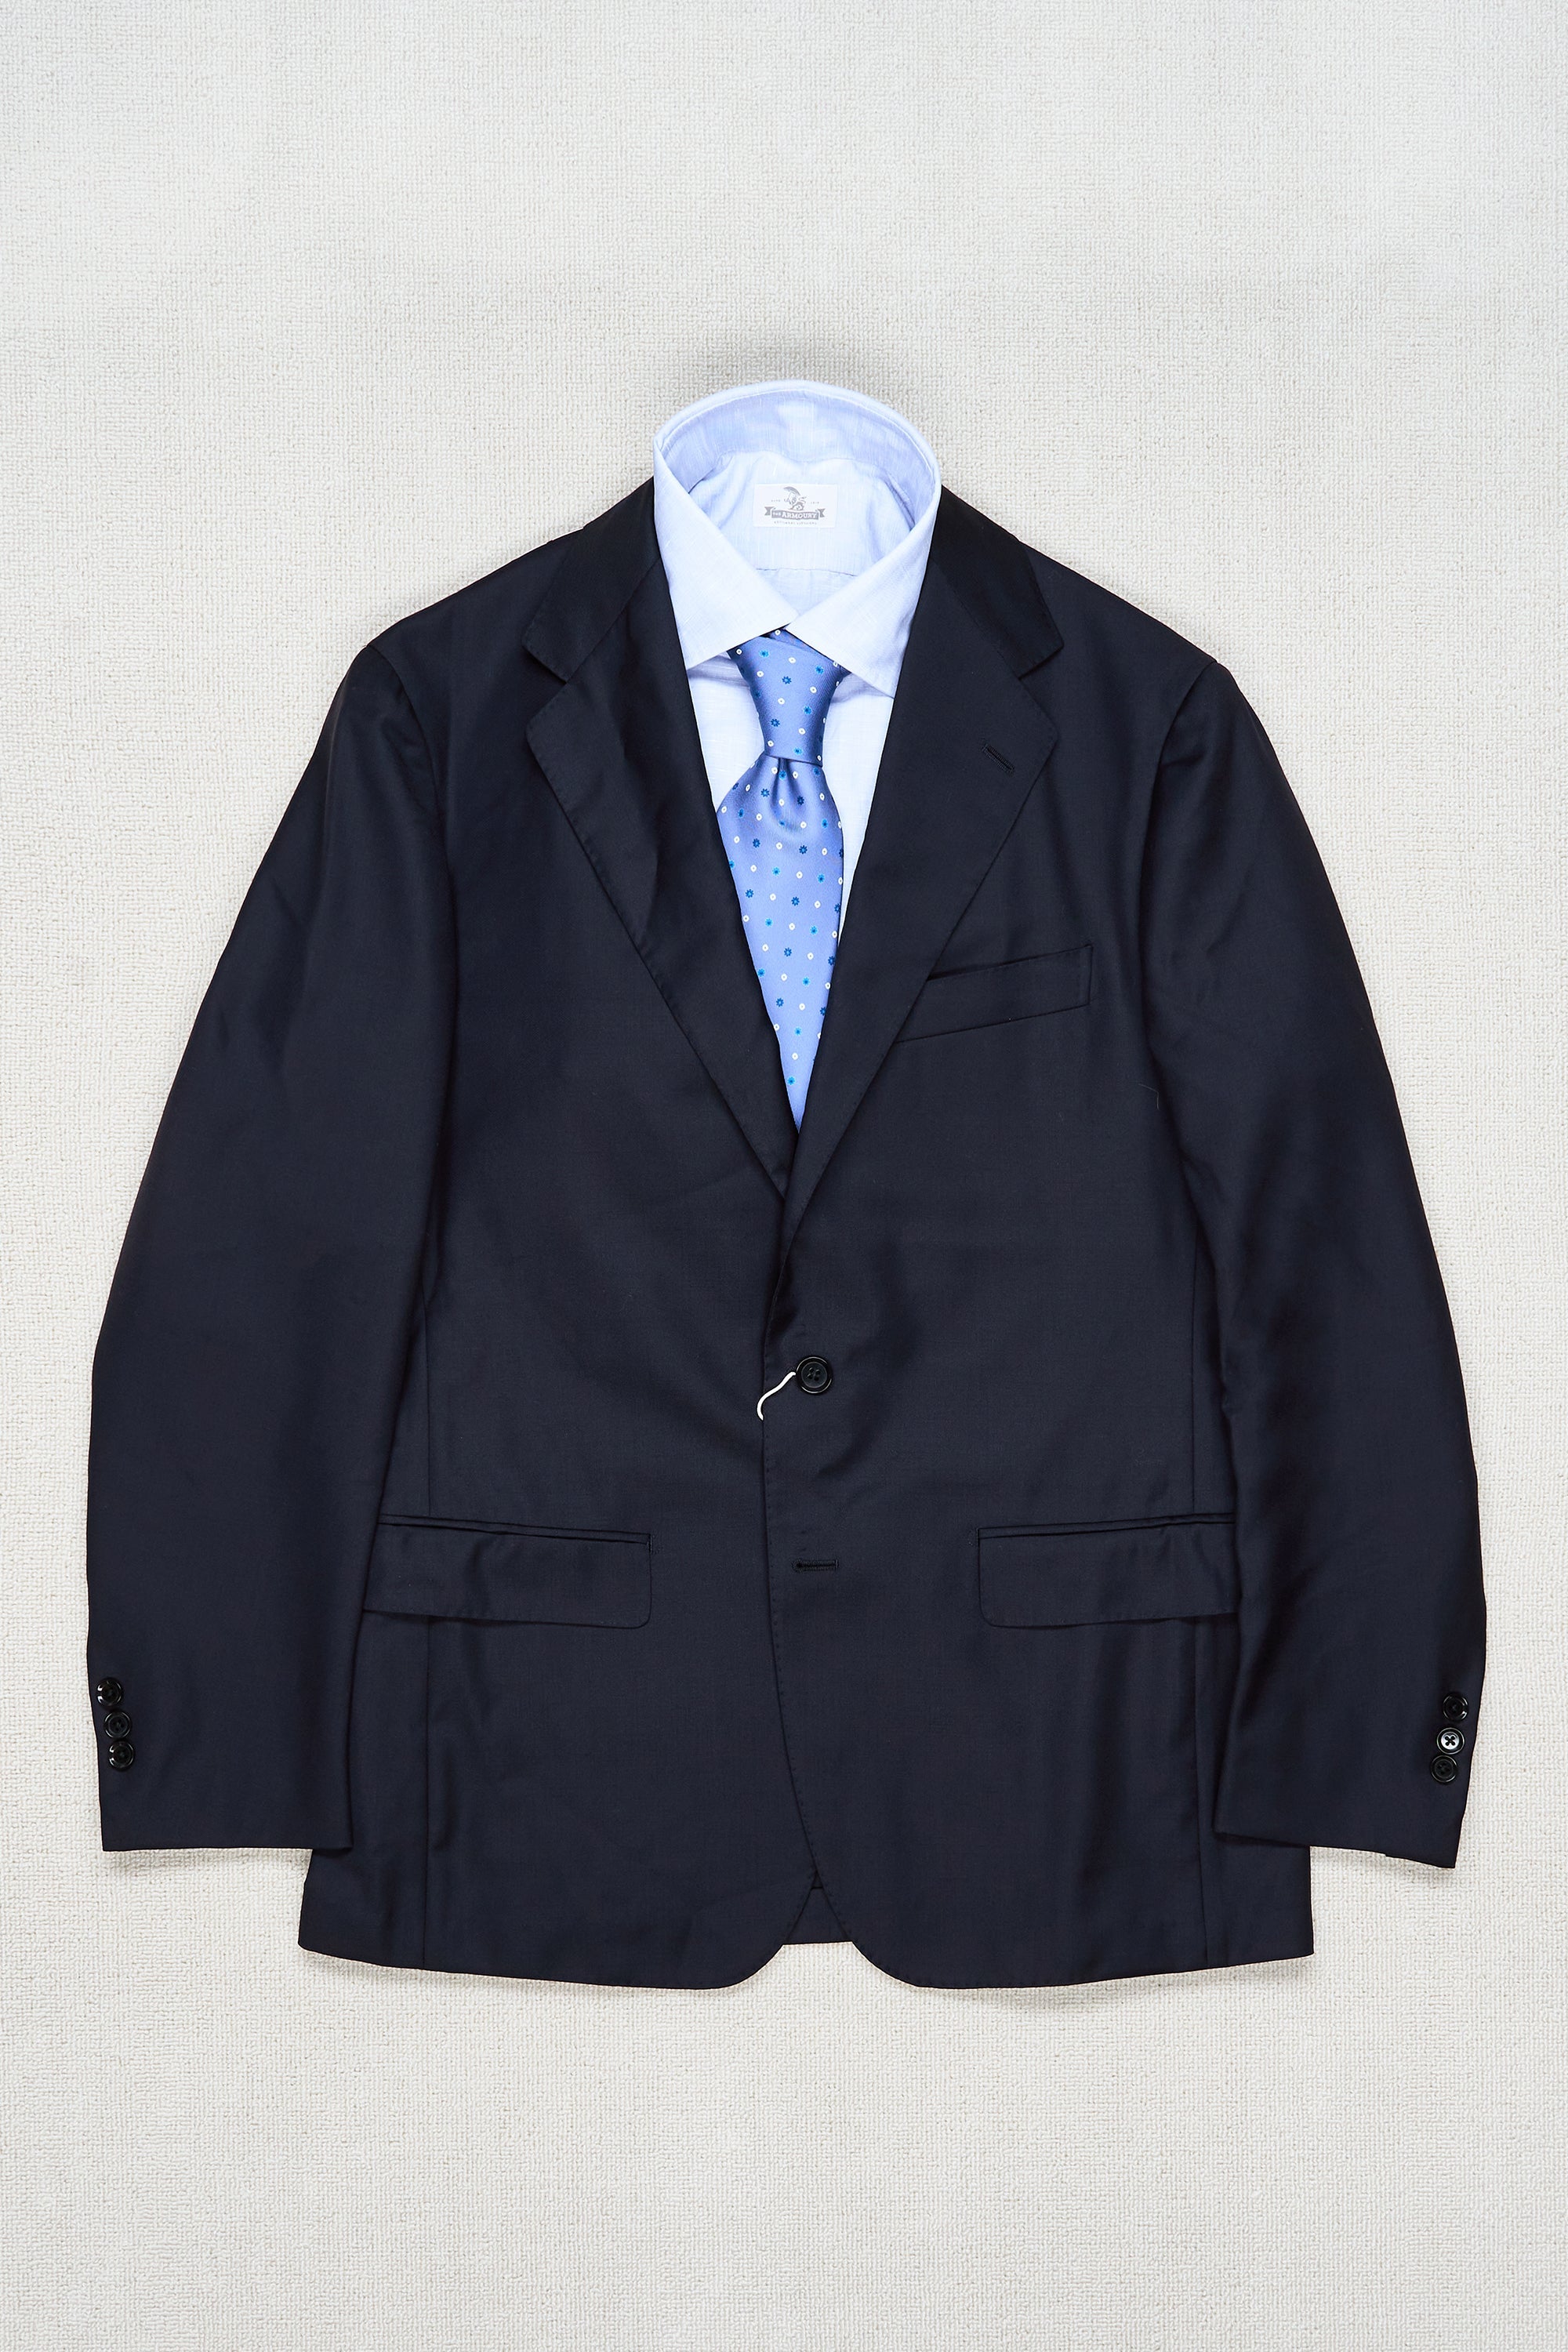 The Armoury by Ring Jacket Navy Wool Sport Coat *sample*